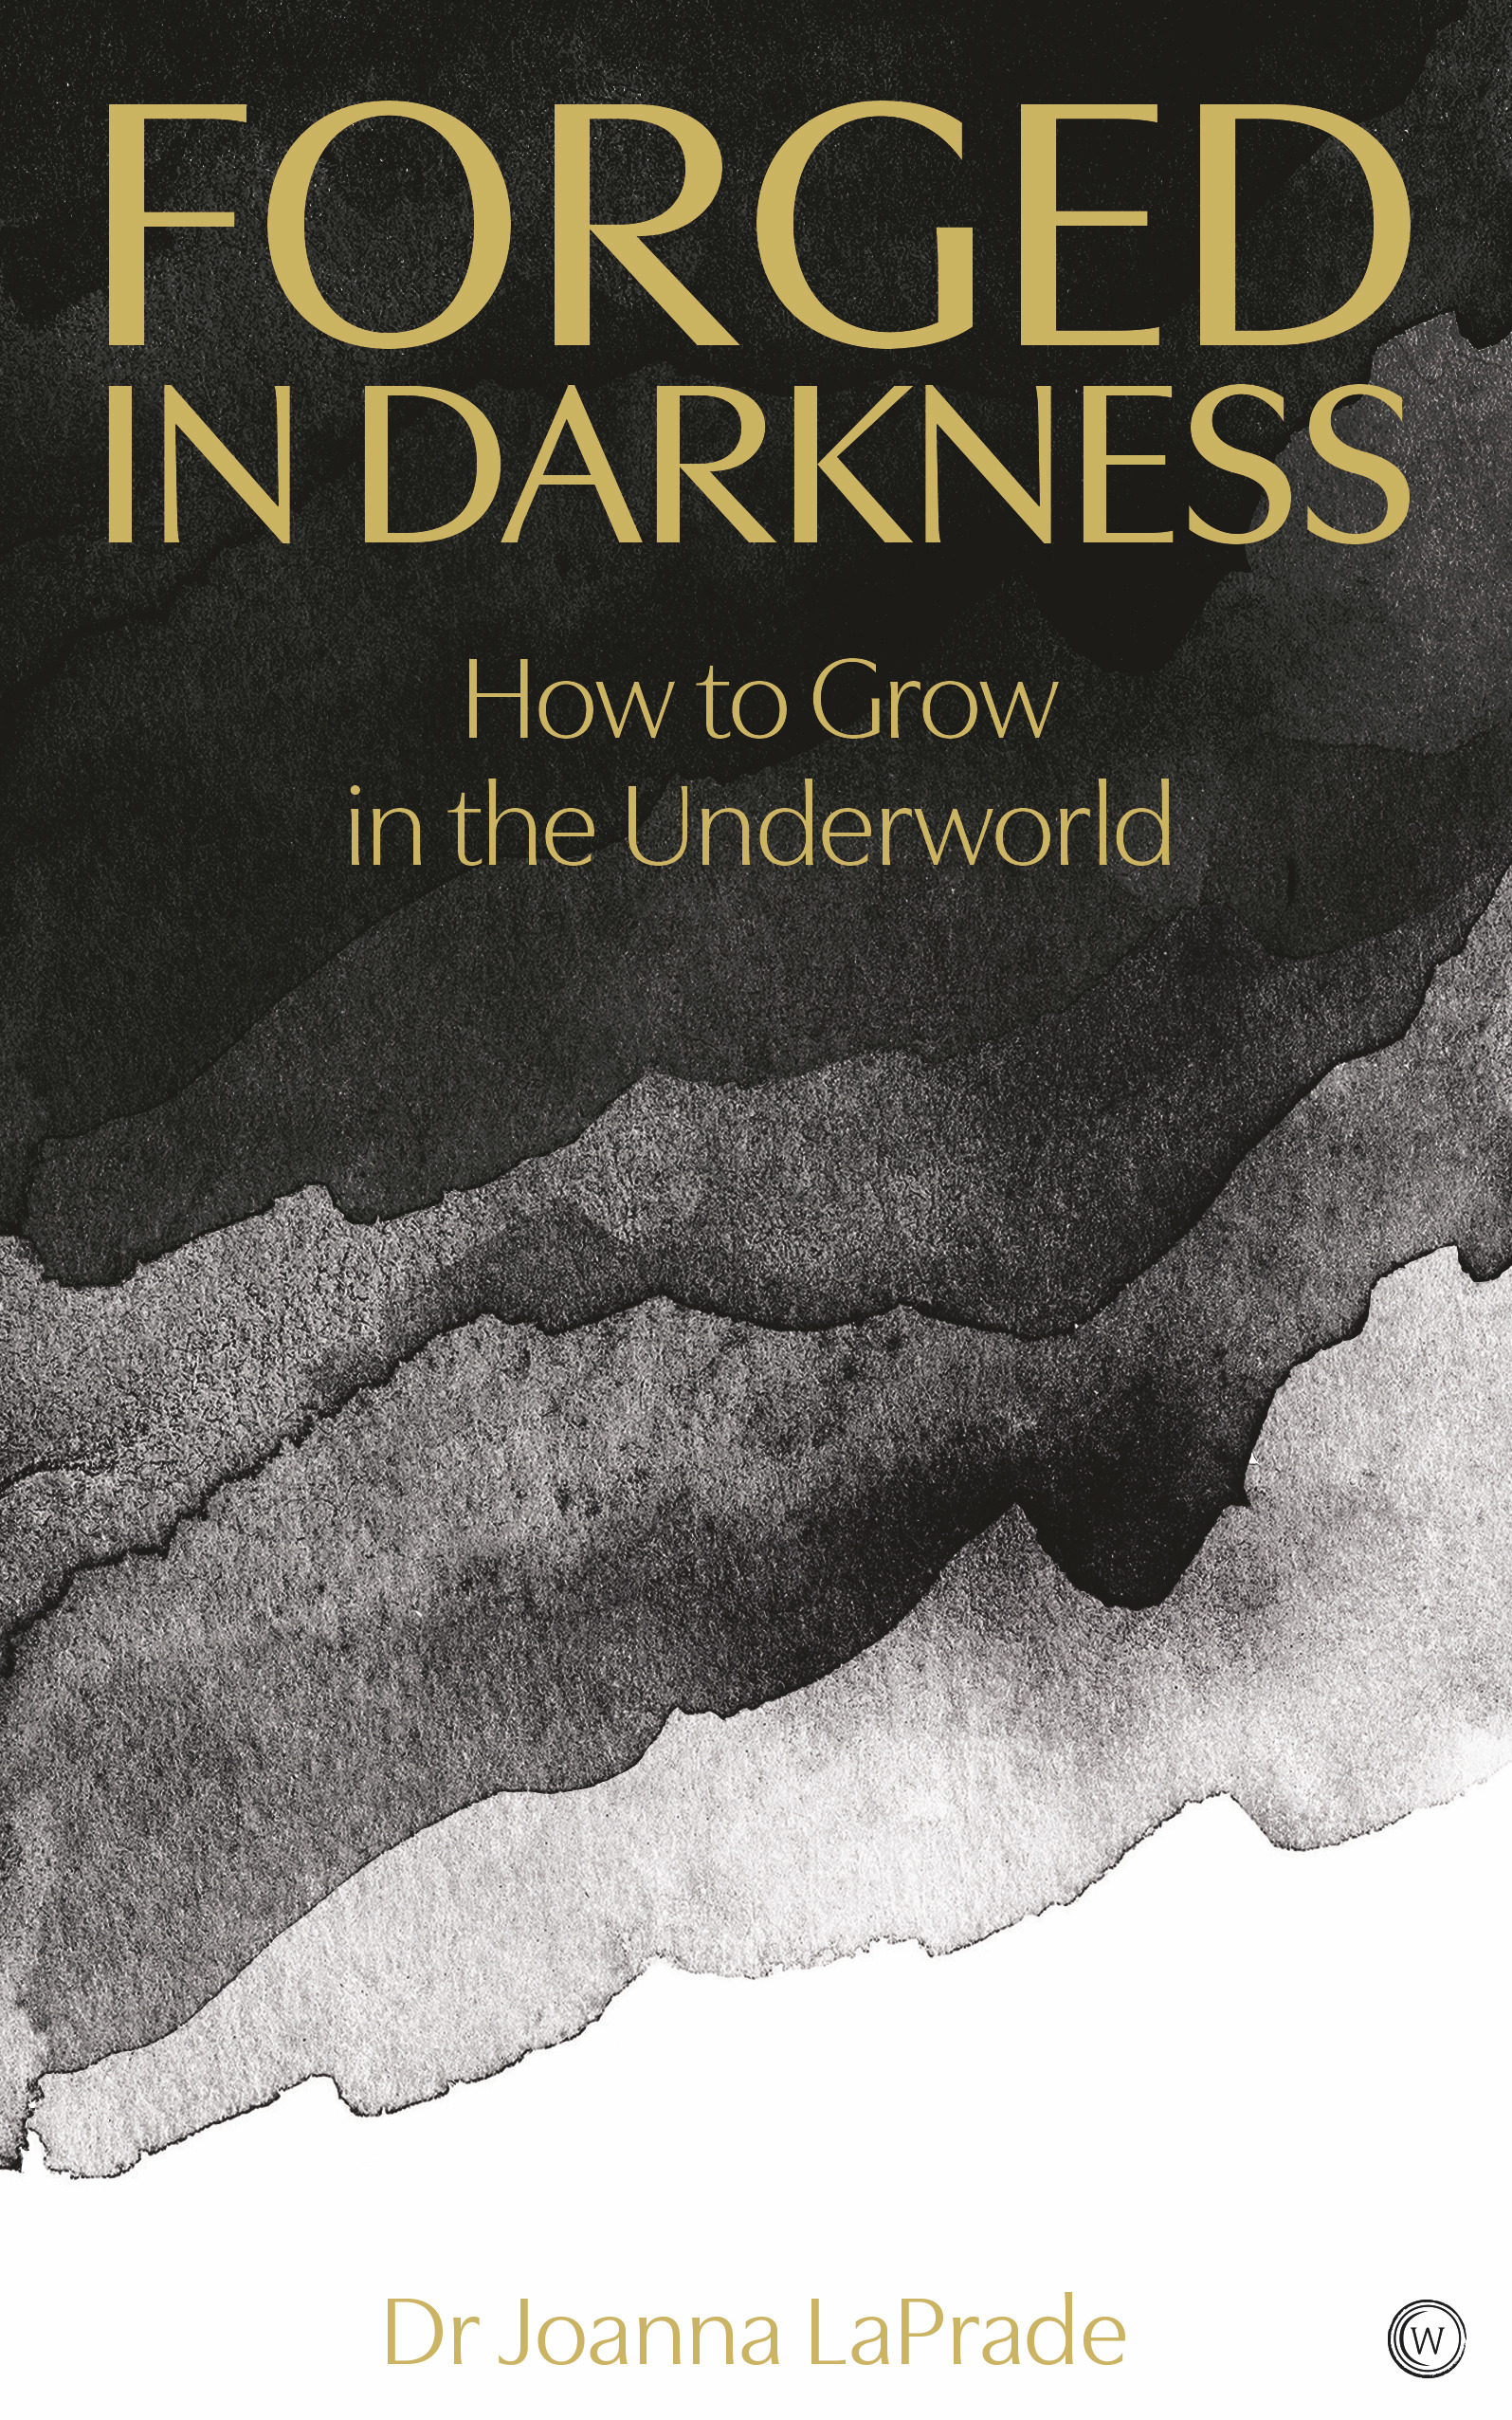 Forged in Darkness : The Many Paths of Personal Transformation | Psychology & Self-Improvement